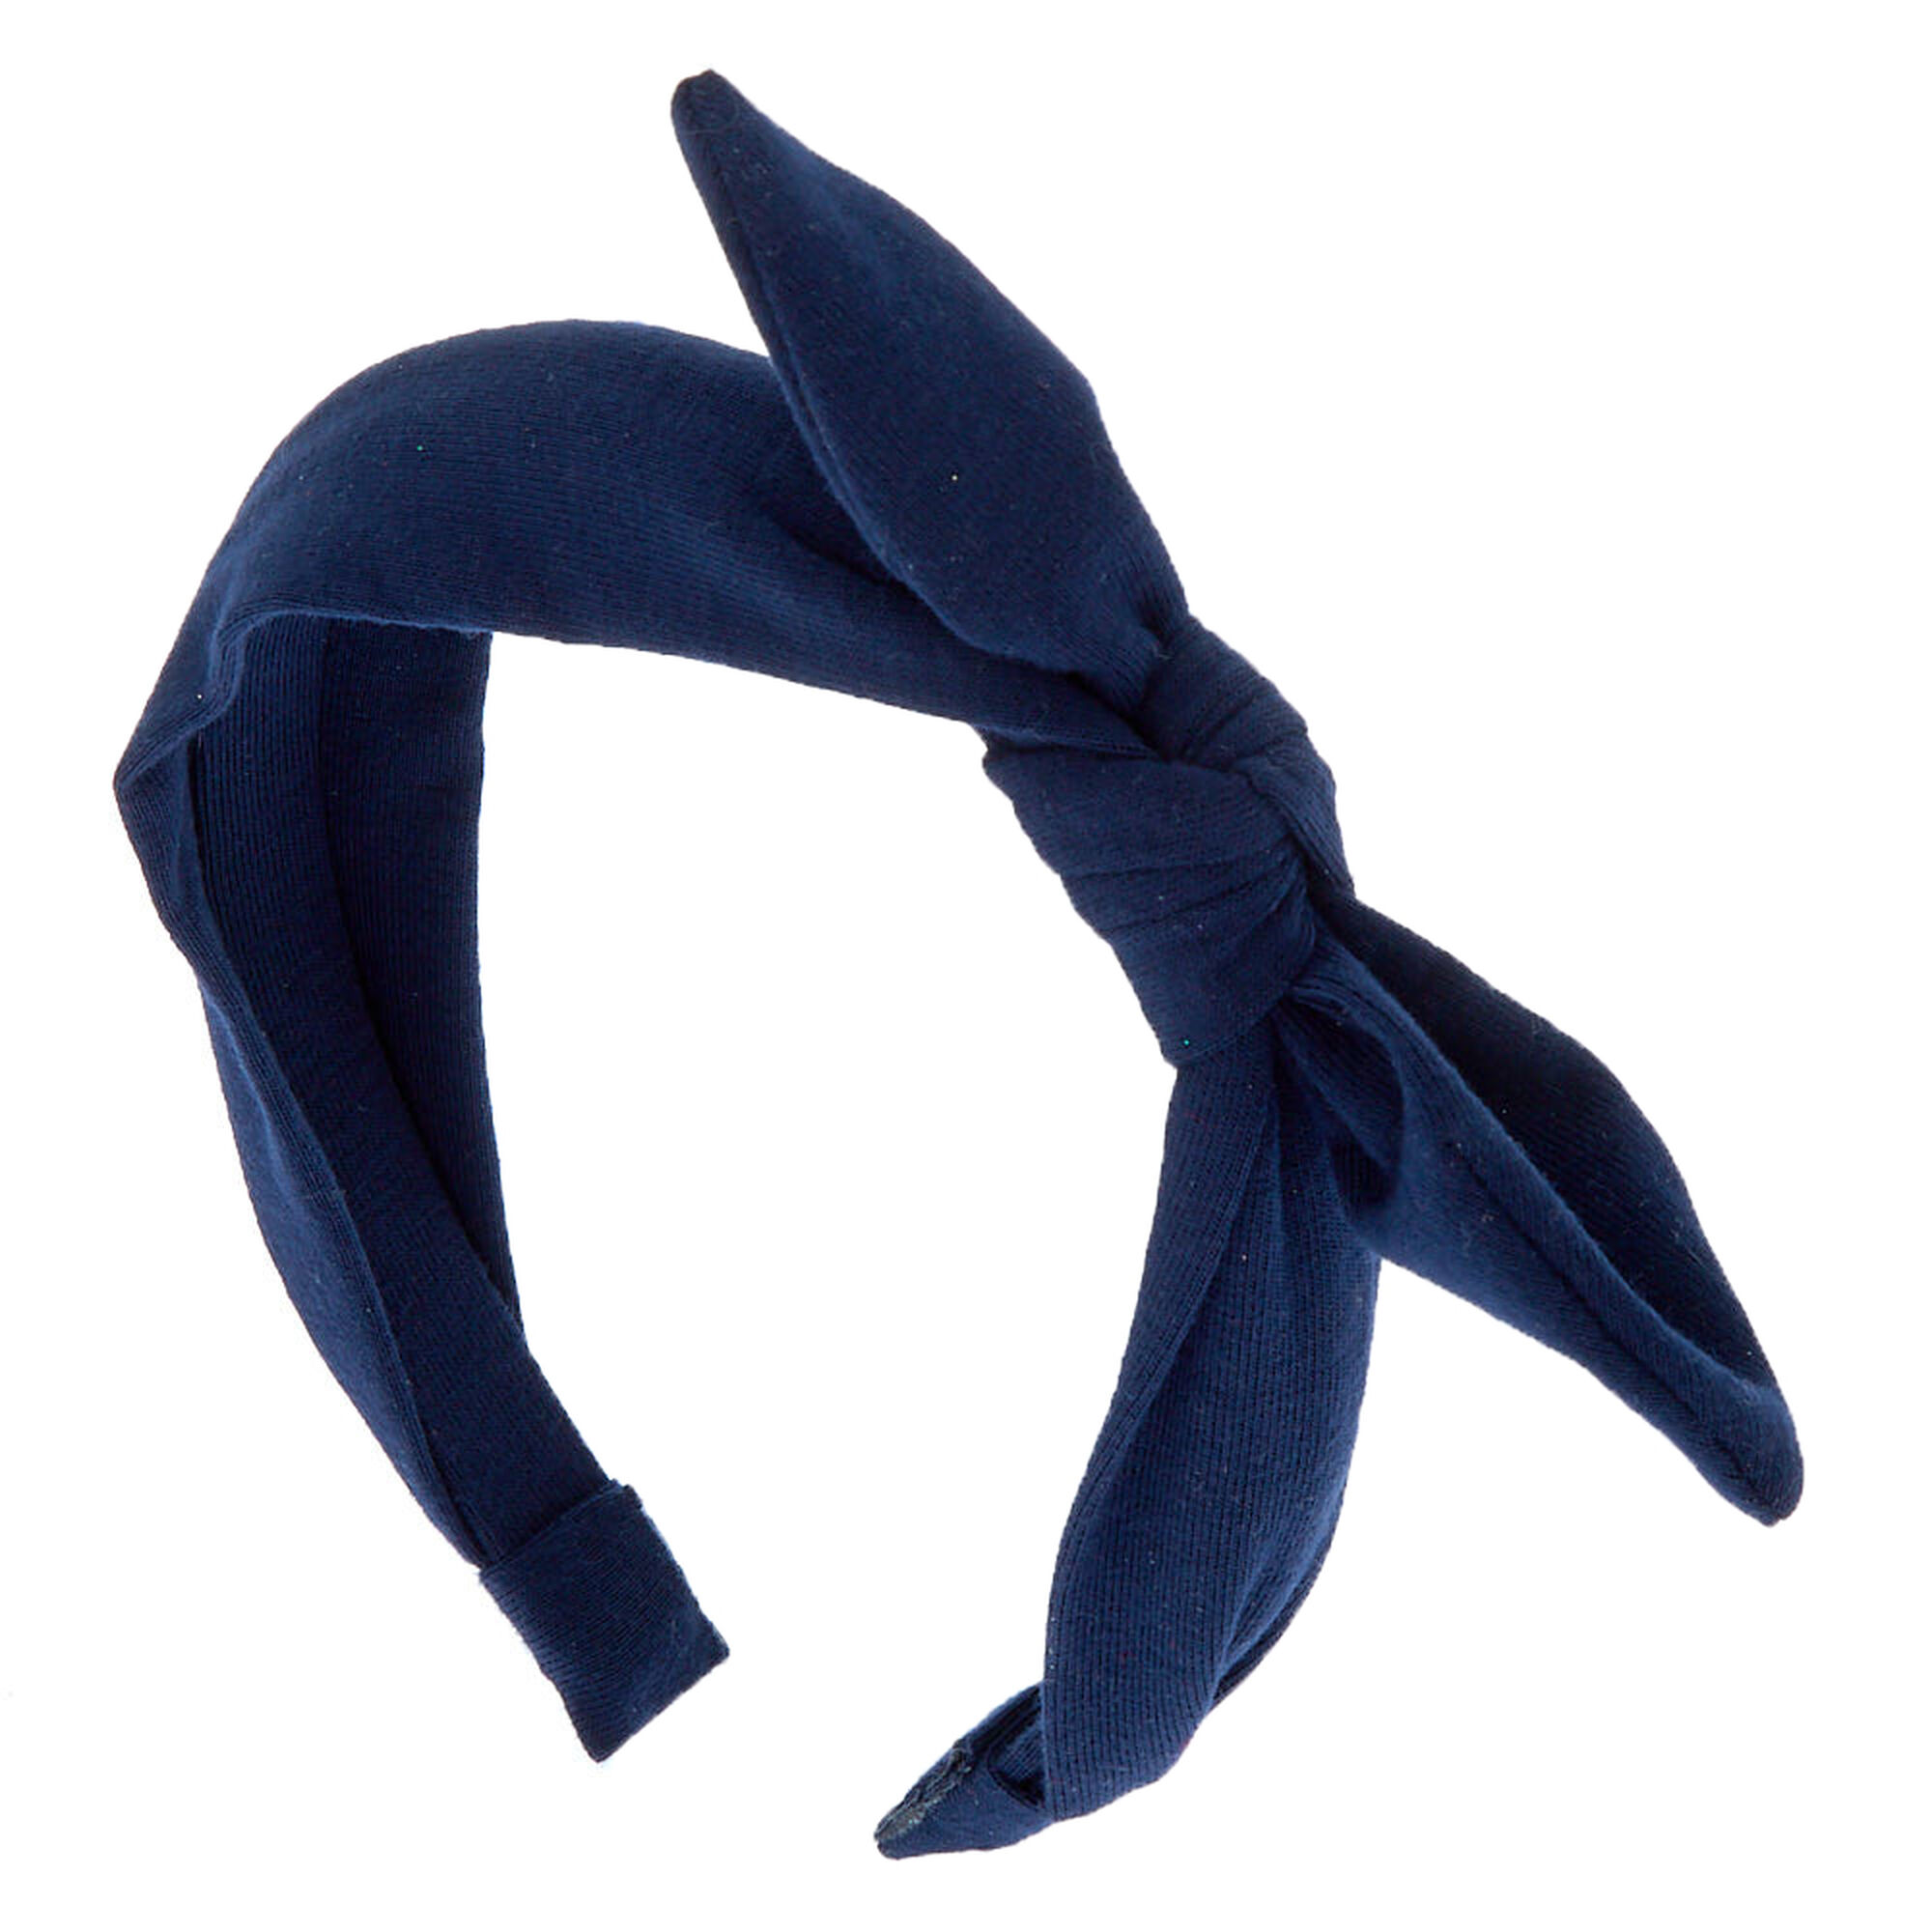 View Claires Knotted Bow Headband Navy information